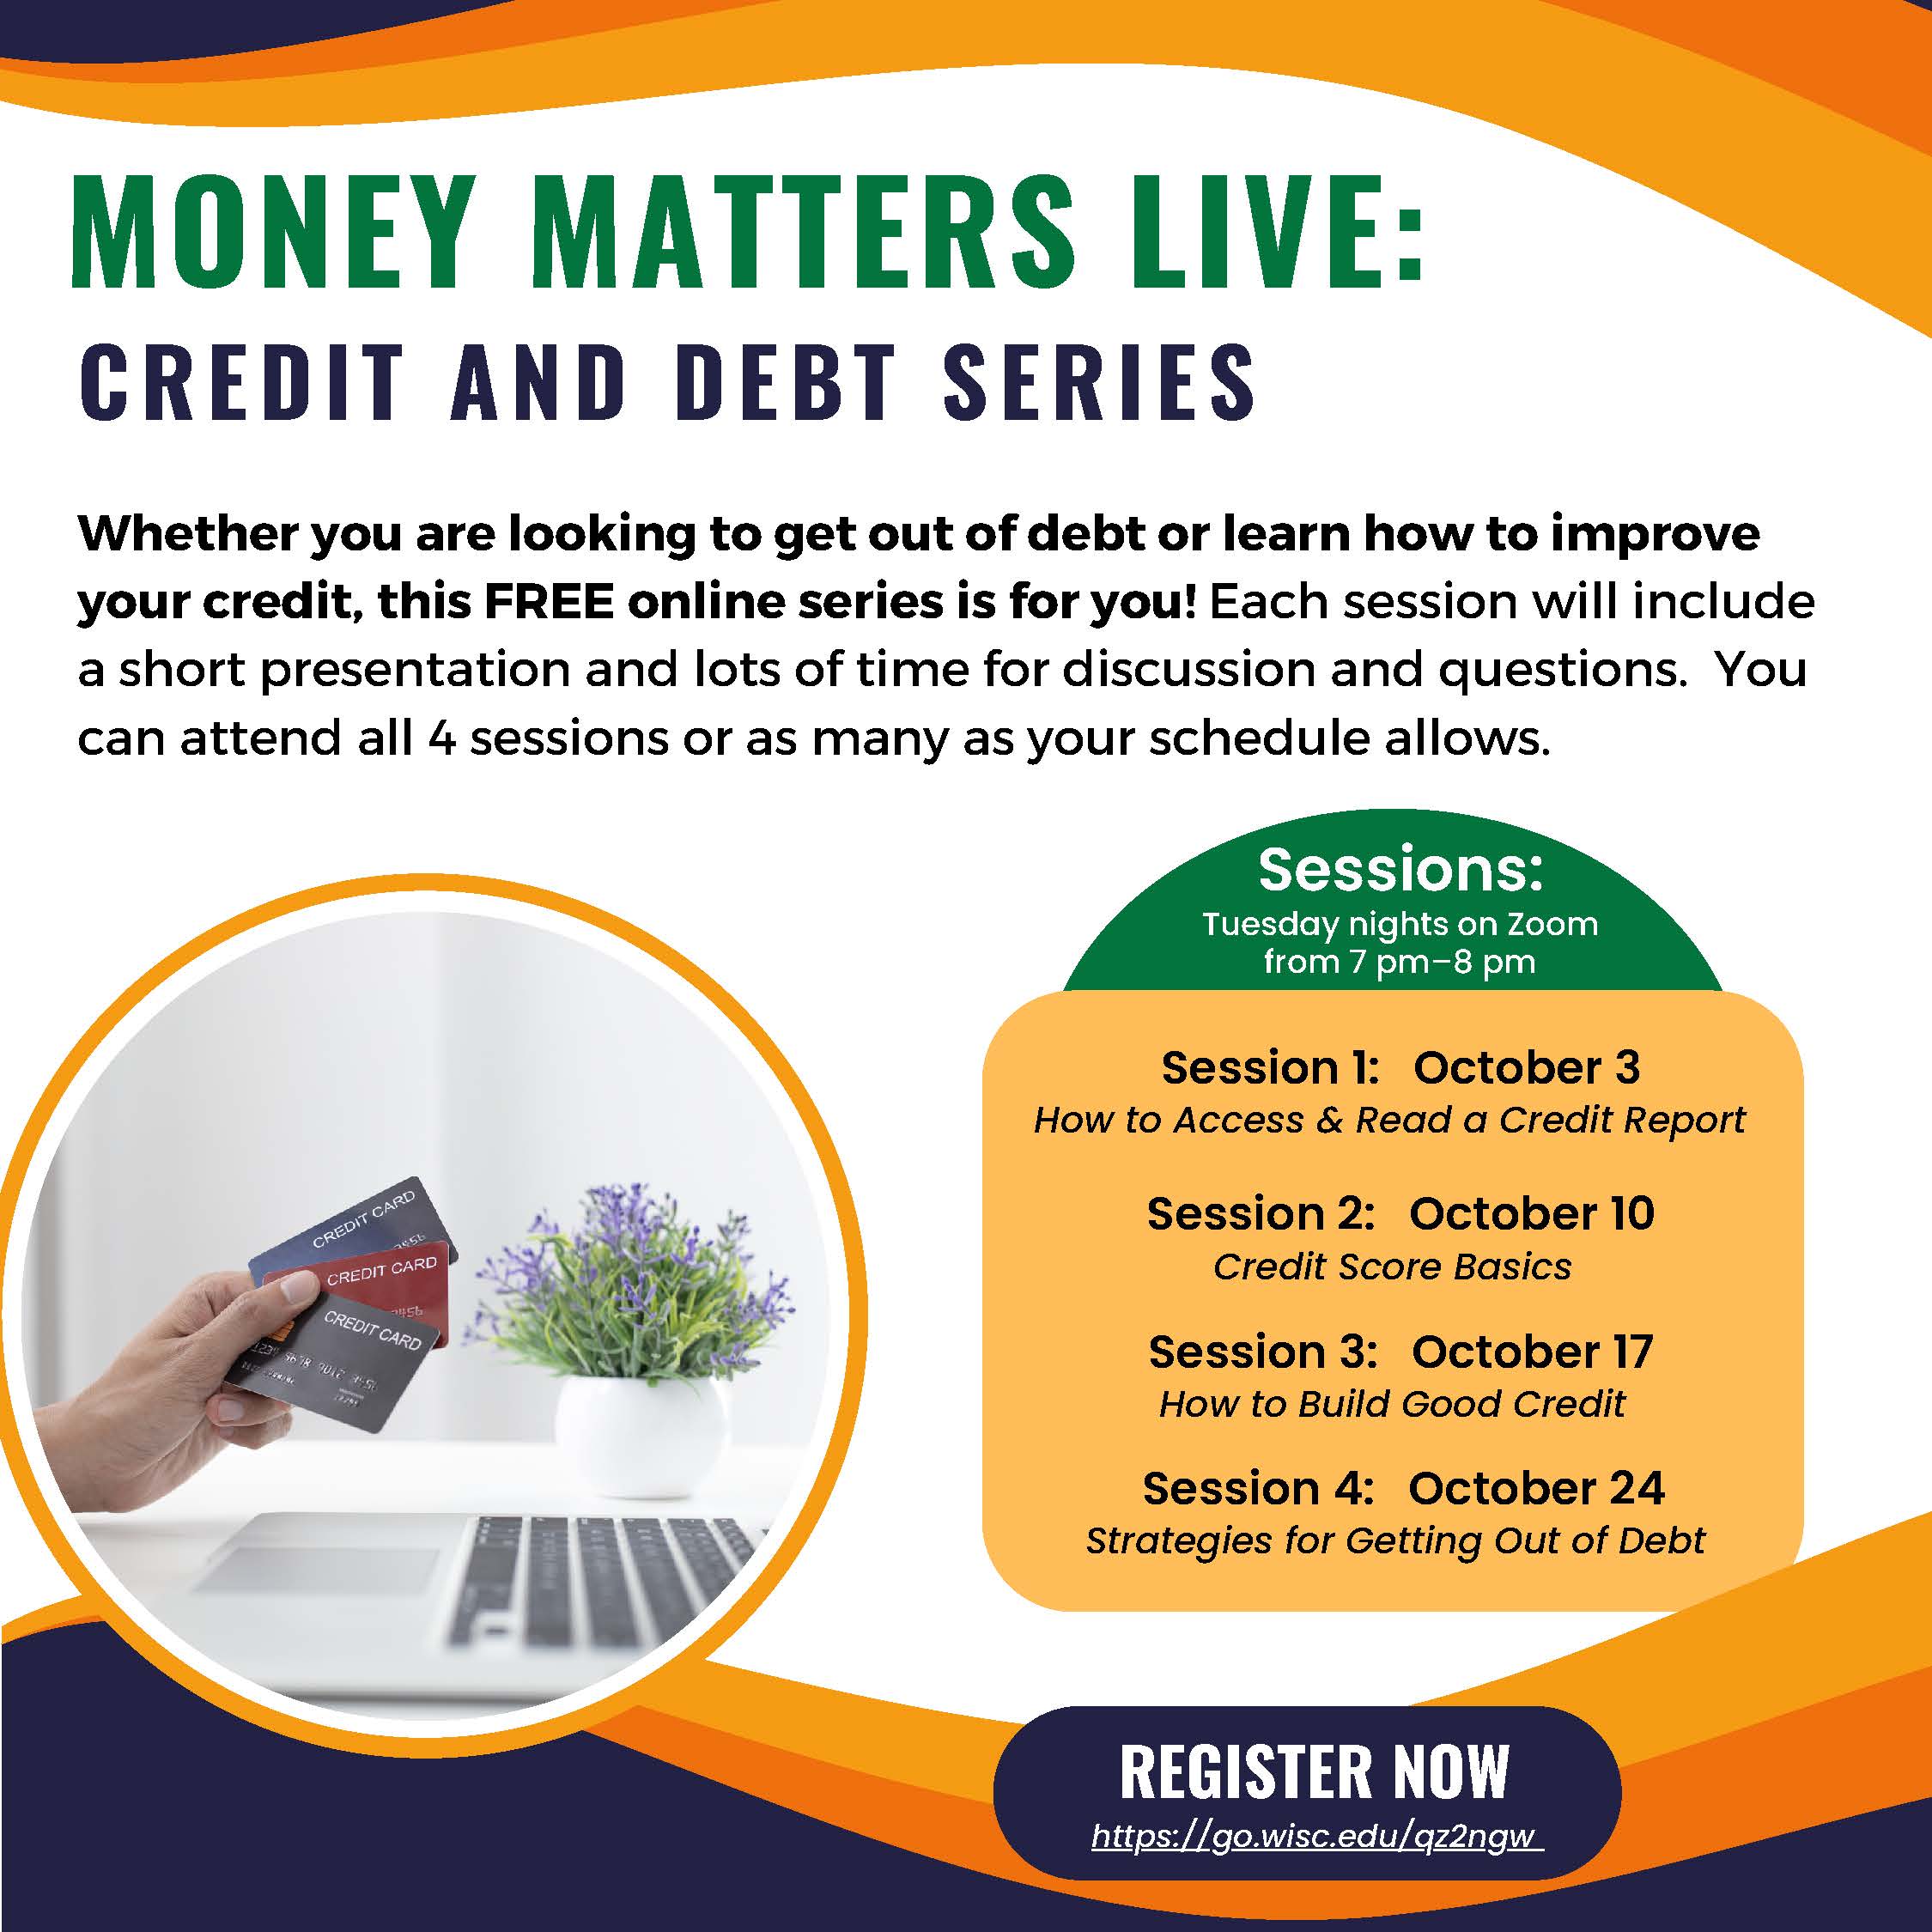 Money Matters Live: Credit and Debt series